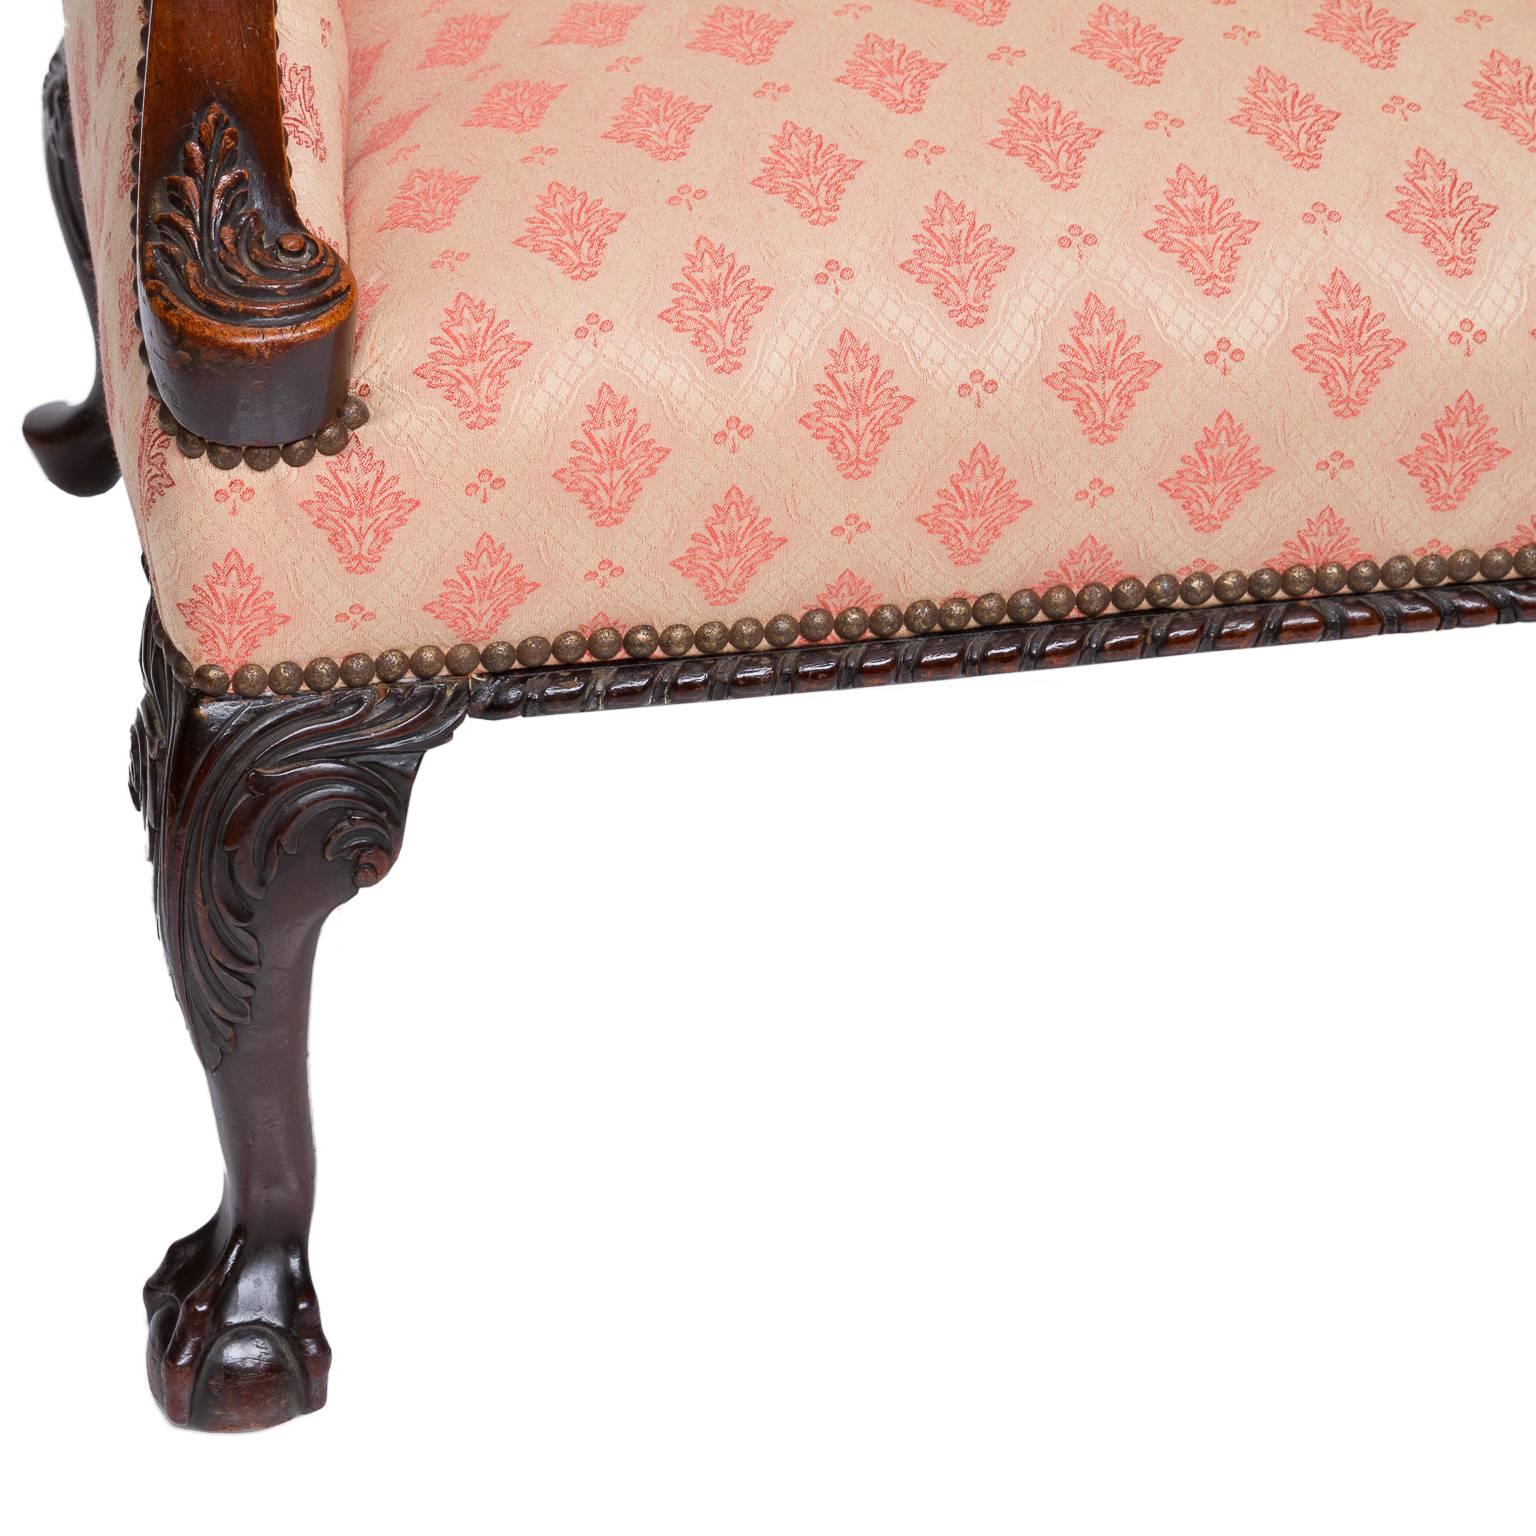 A fine George III mahogany closed arm, armchair. There is a fine fabric covering with tufting to the back and a accent pillow. The arm supports are carved with leaf design. The front two legs have a nice cabriole and acanthus leaf carved knee’s,